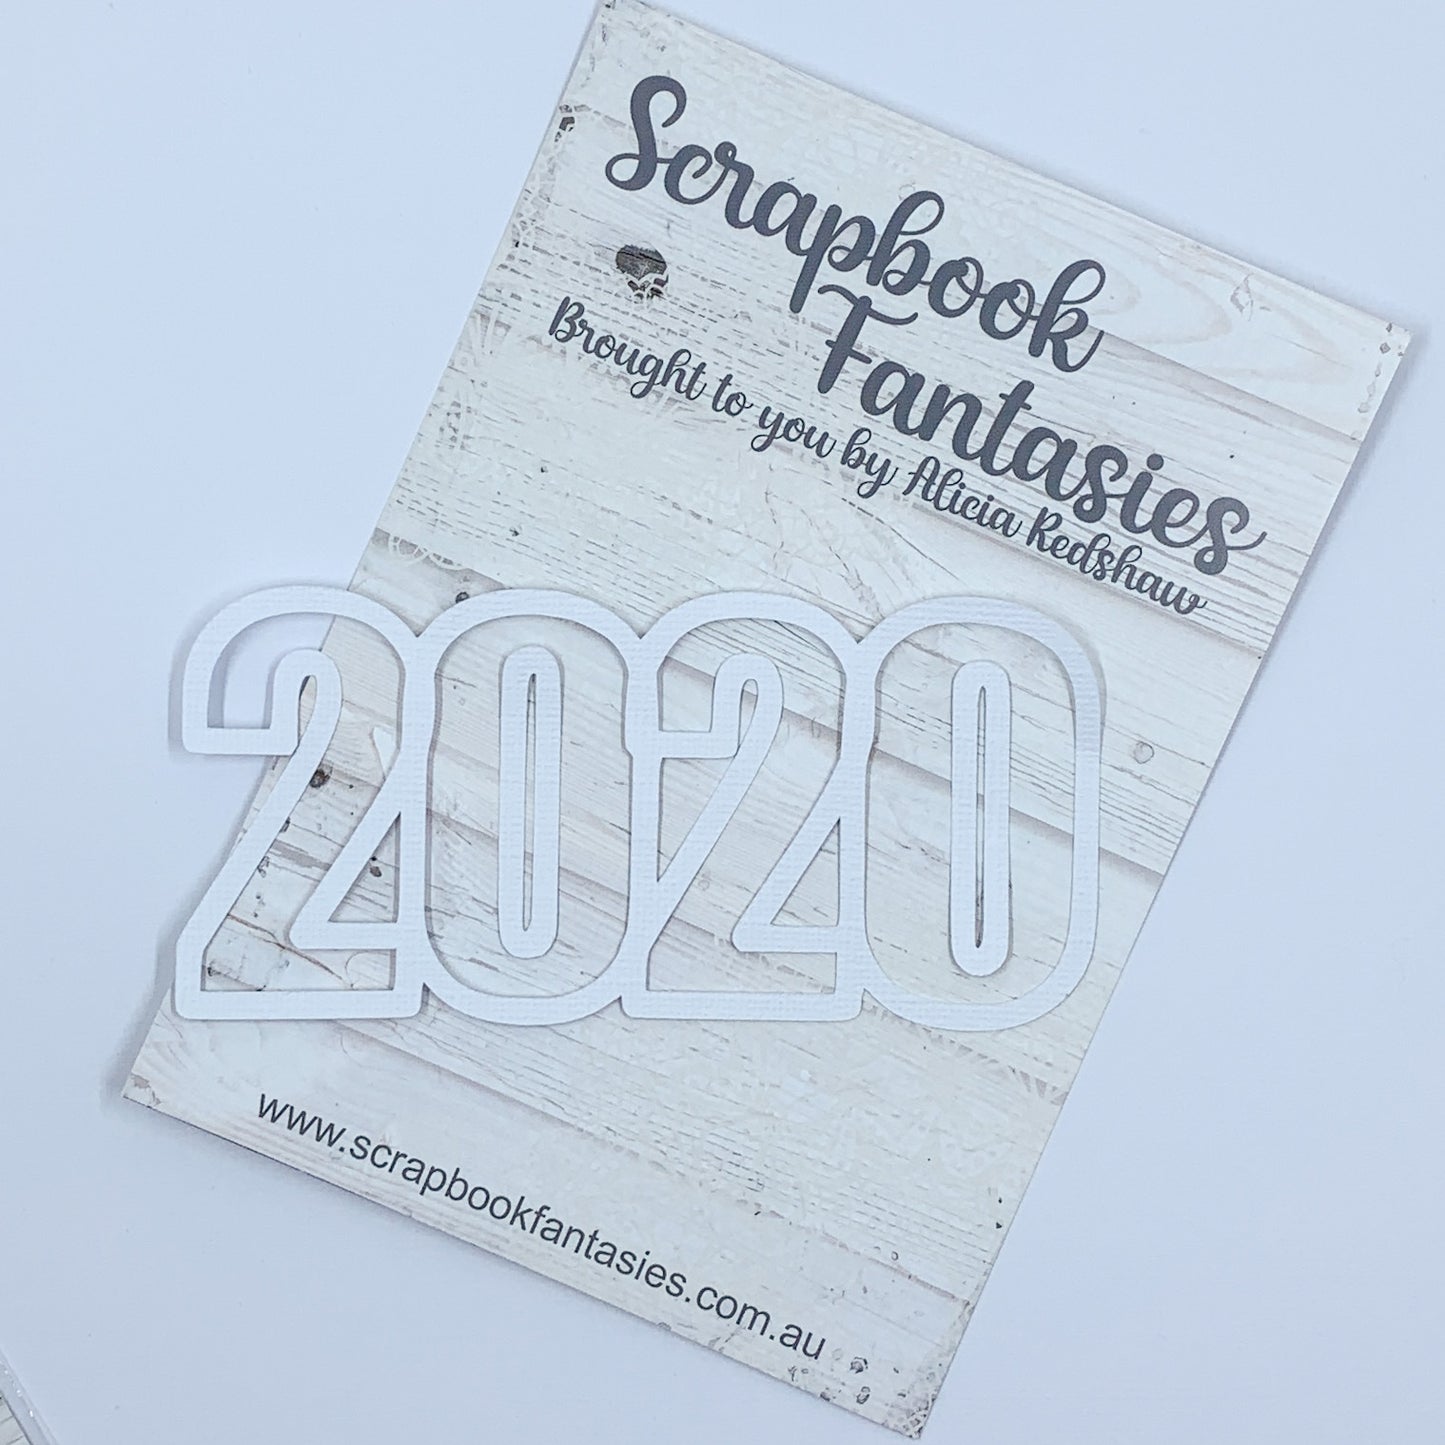 2020 (open) 2.25"x4.75" White Linen Cardstock Title-Cut - Designed by Alicia Redshaw